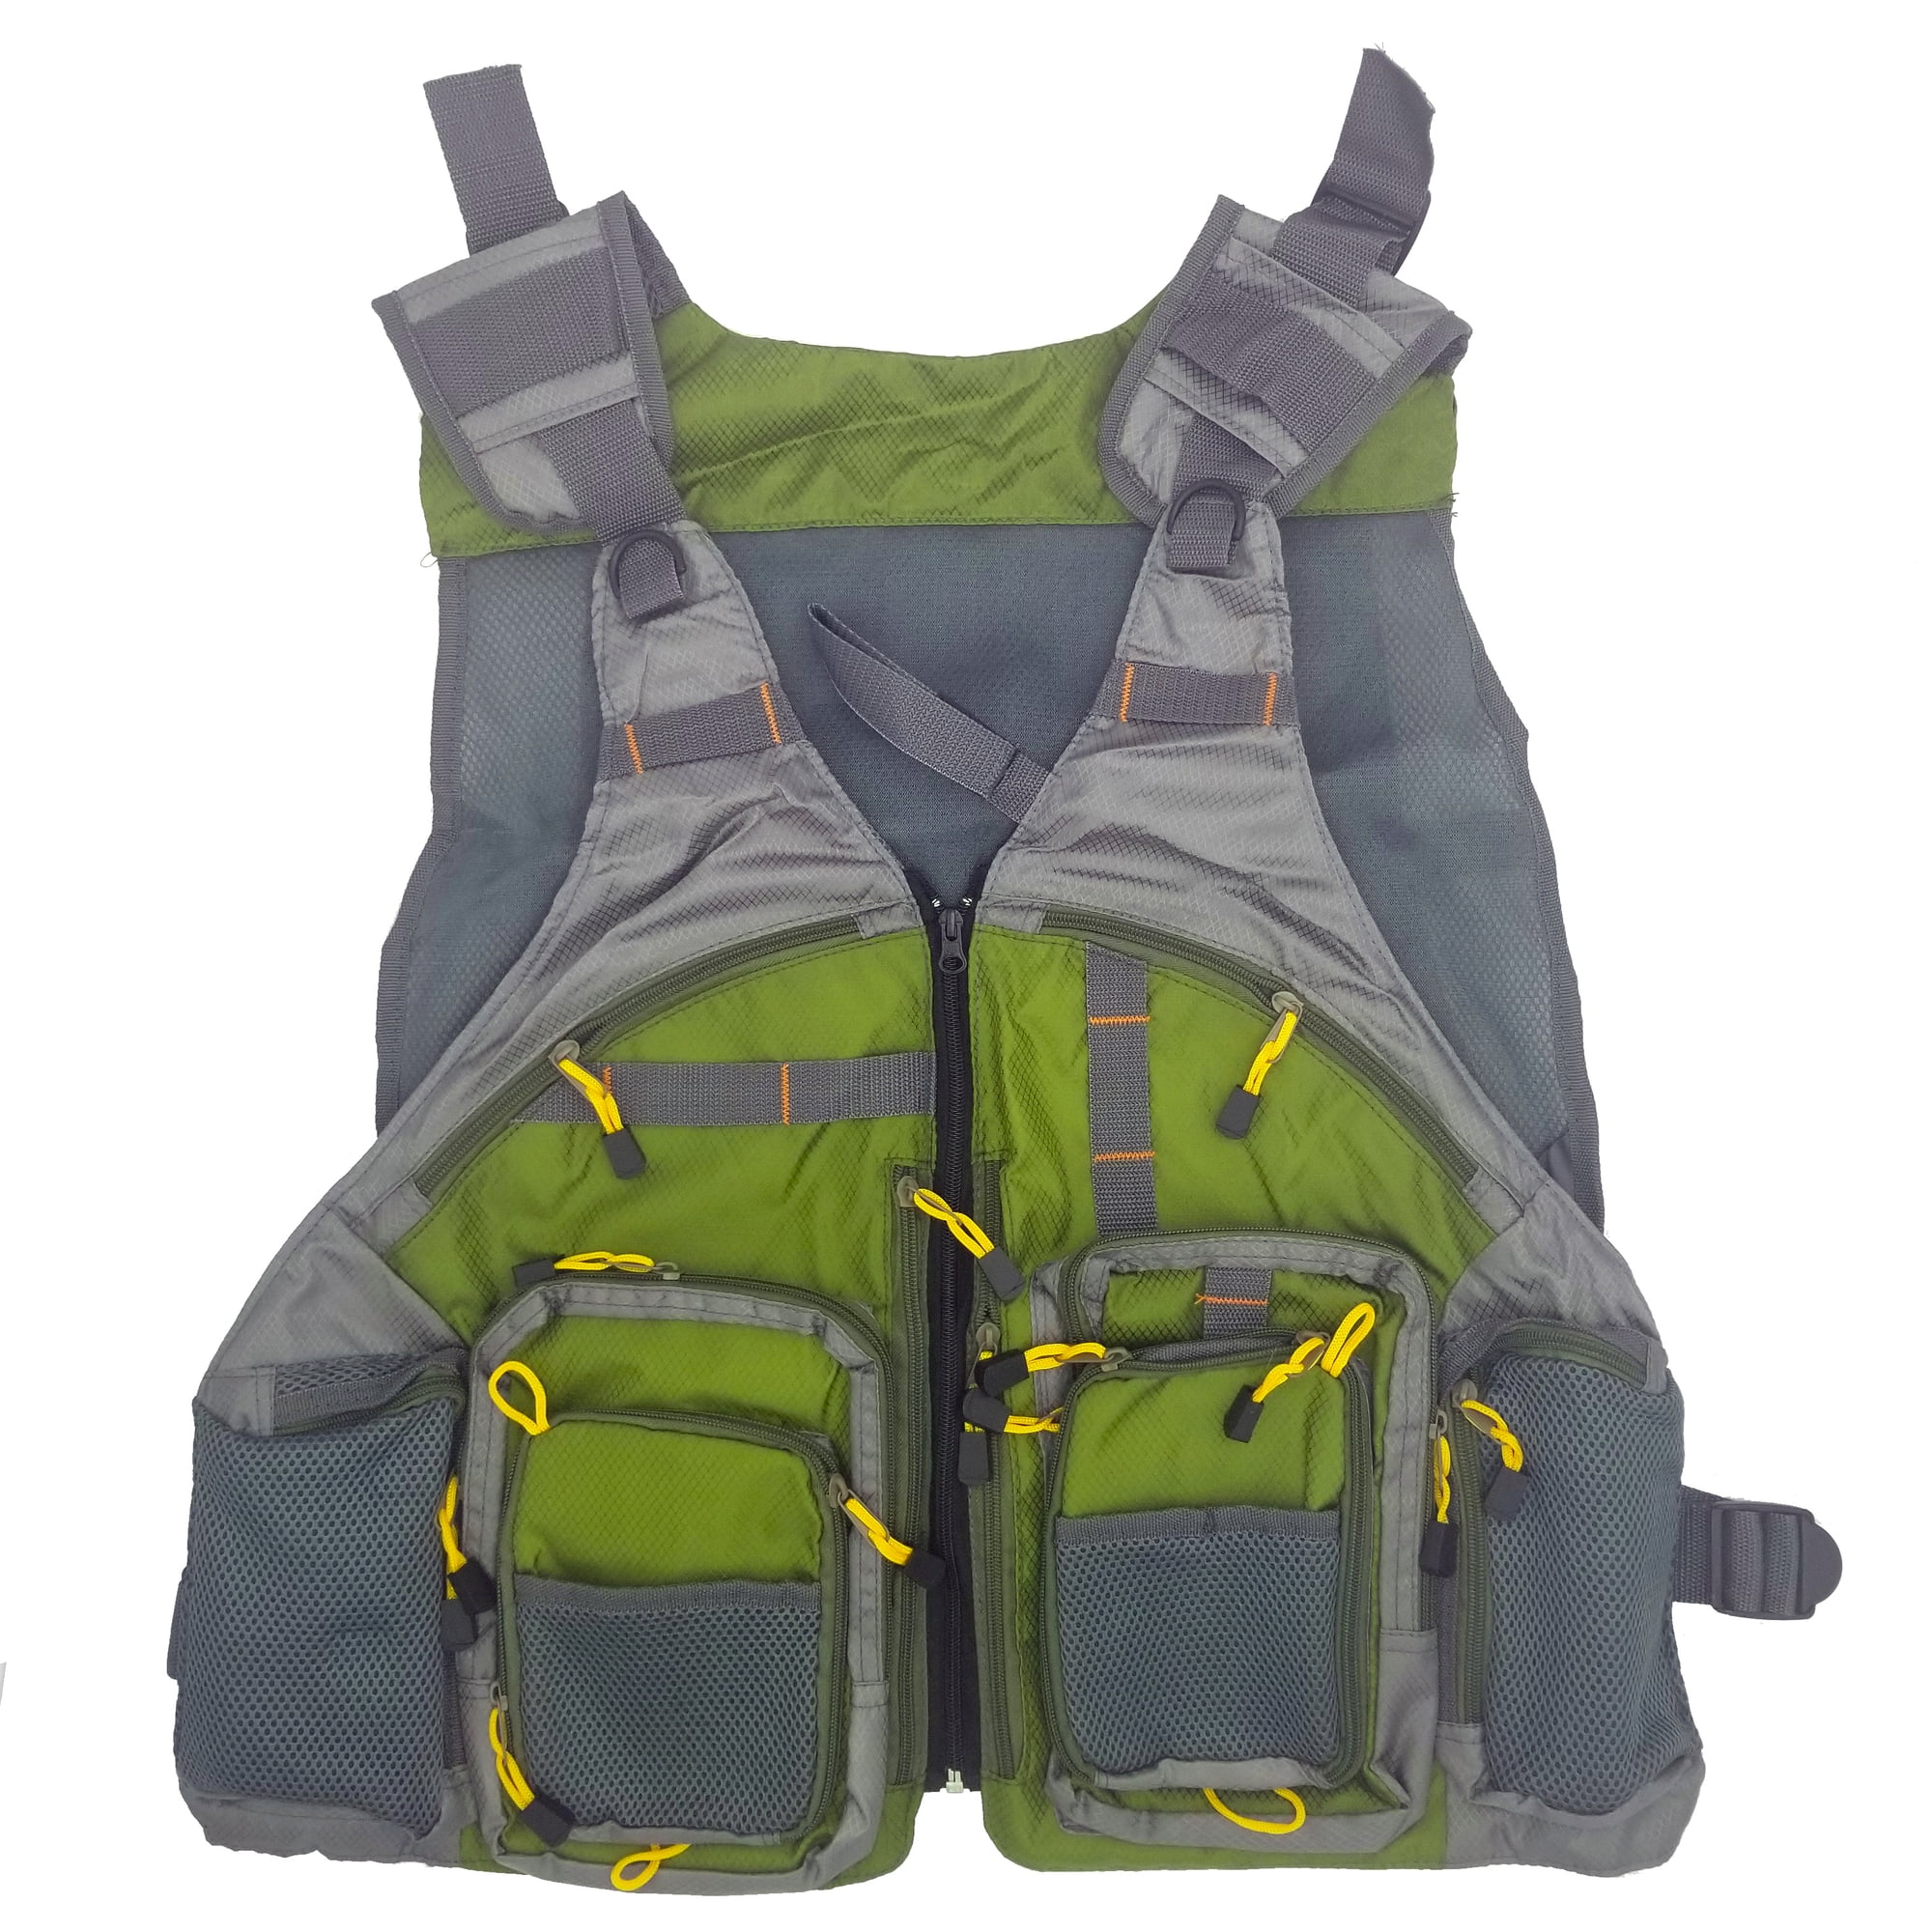 Ascent's Fisherman's Gift Adjustable Fishing Vest - For Fly Fishing,  Outdoor Sports, Camping and Hiking, Best Gift Idea for Family, Father, Men